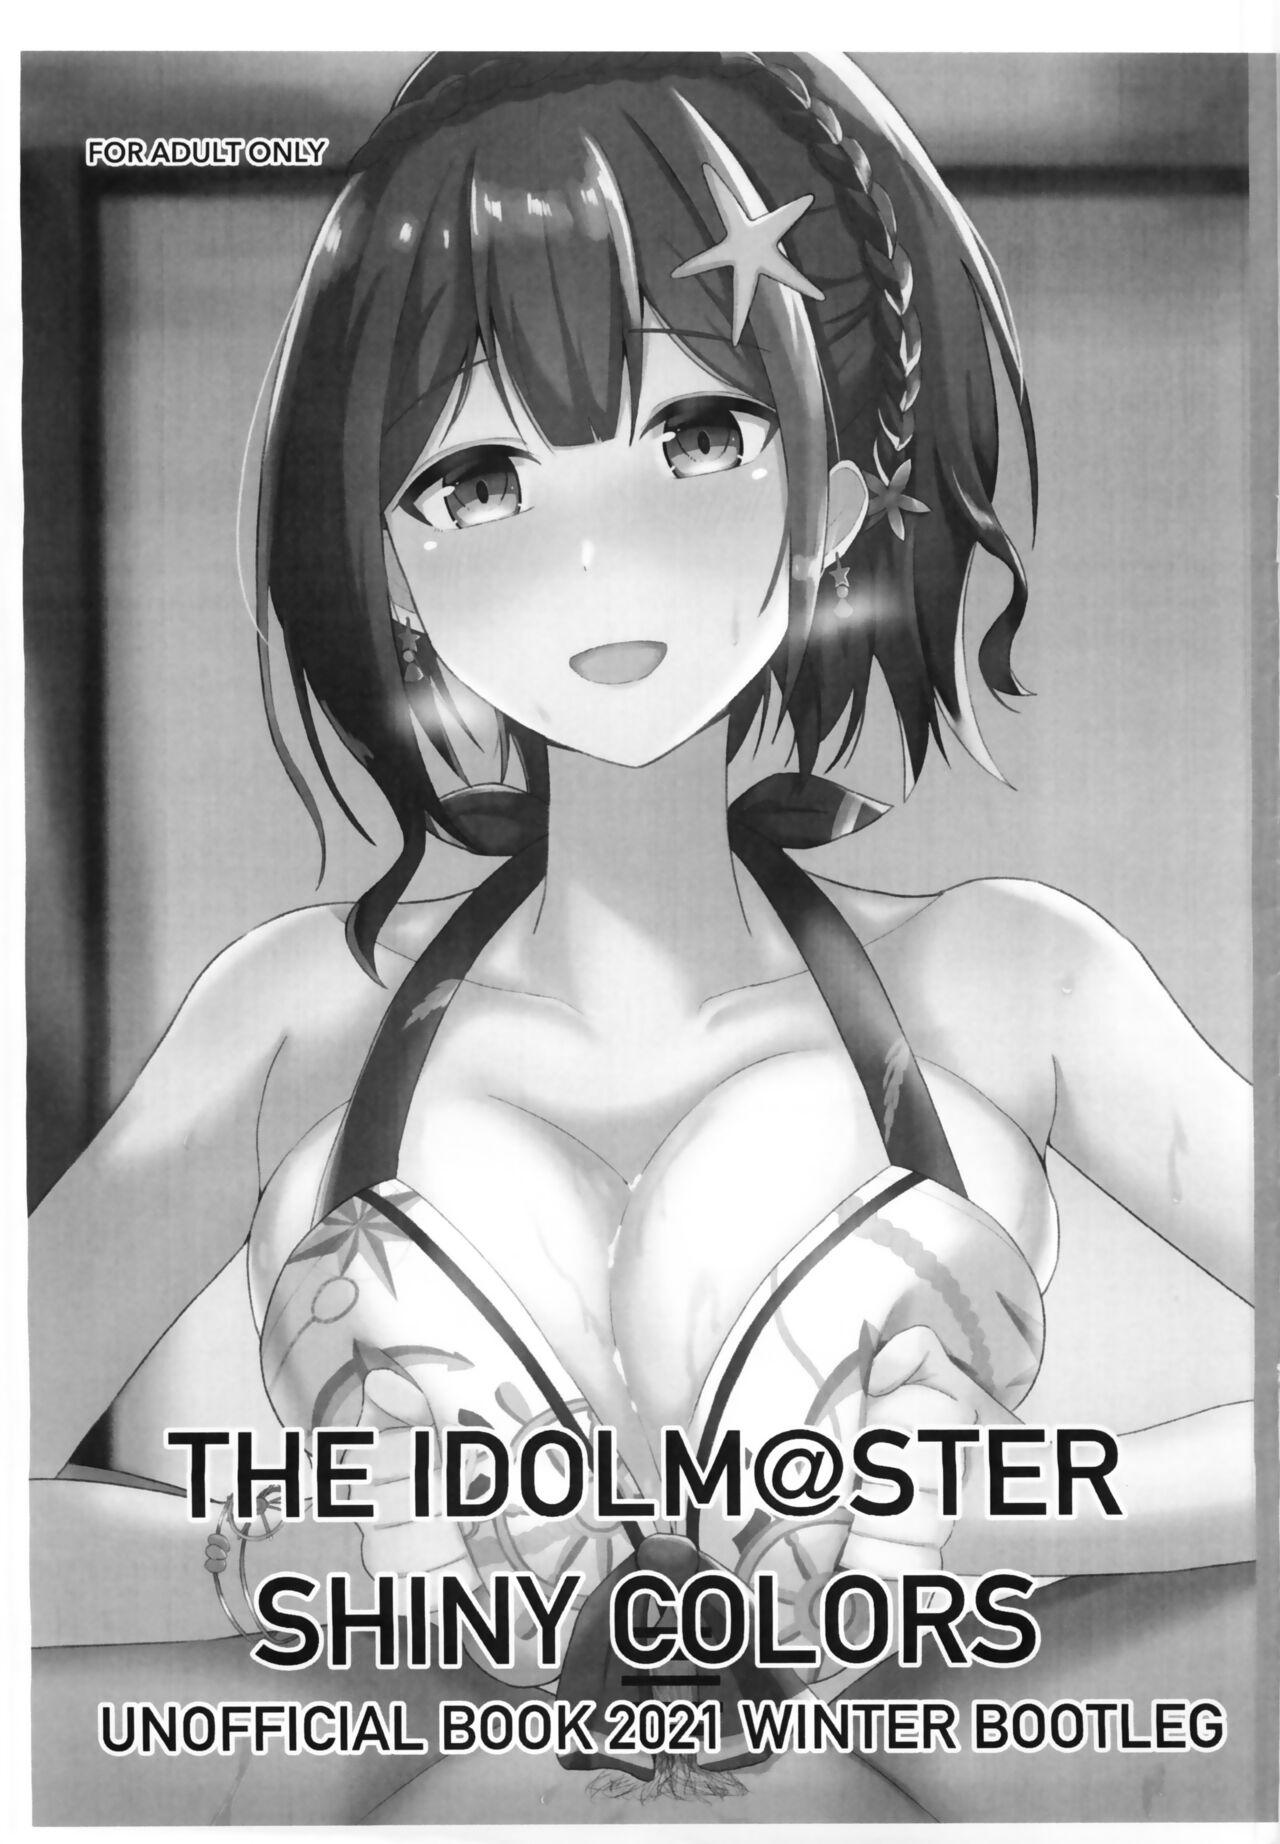 Big Penis UNOFFICIAL BOOK 2021 WINTER BOOTLEG - The idolmaster Doggy Style Porn - Picture 1